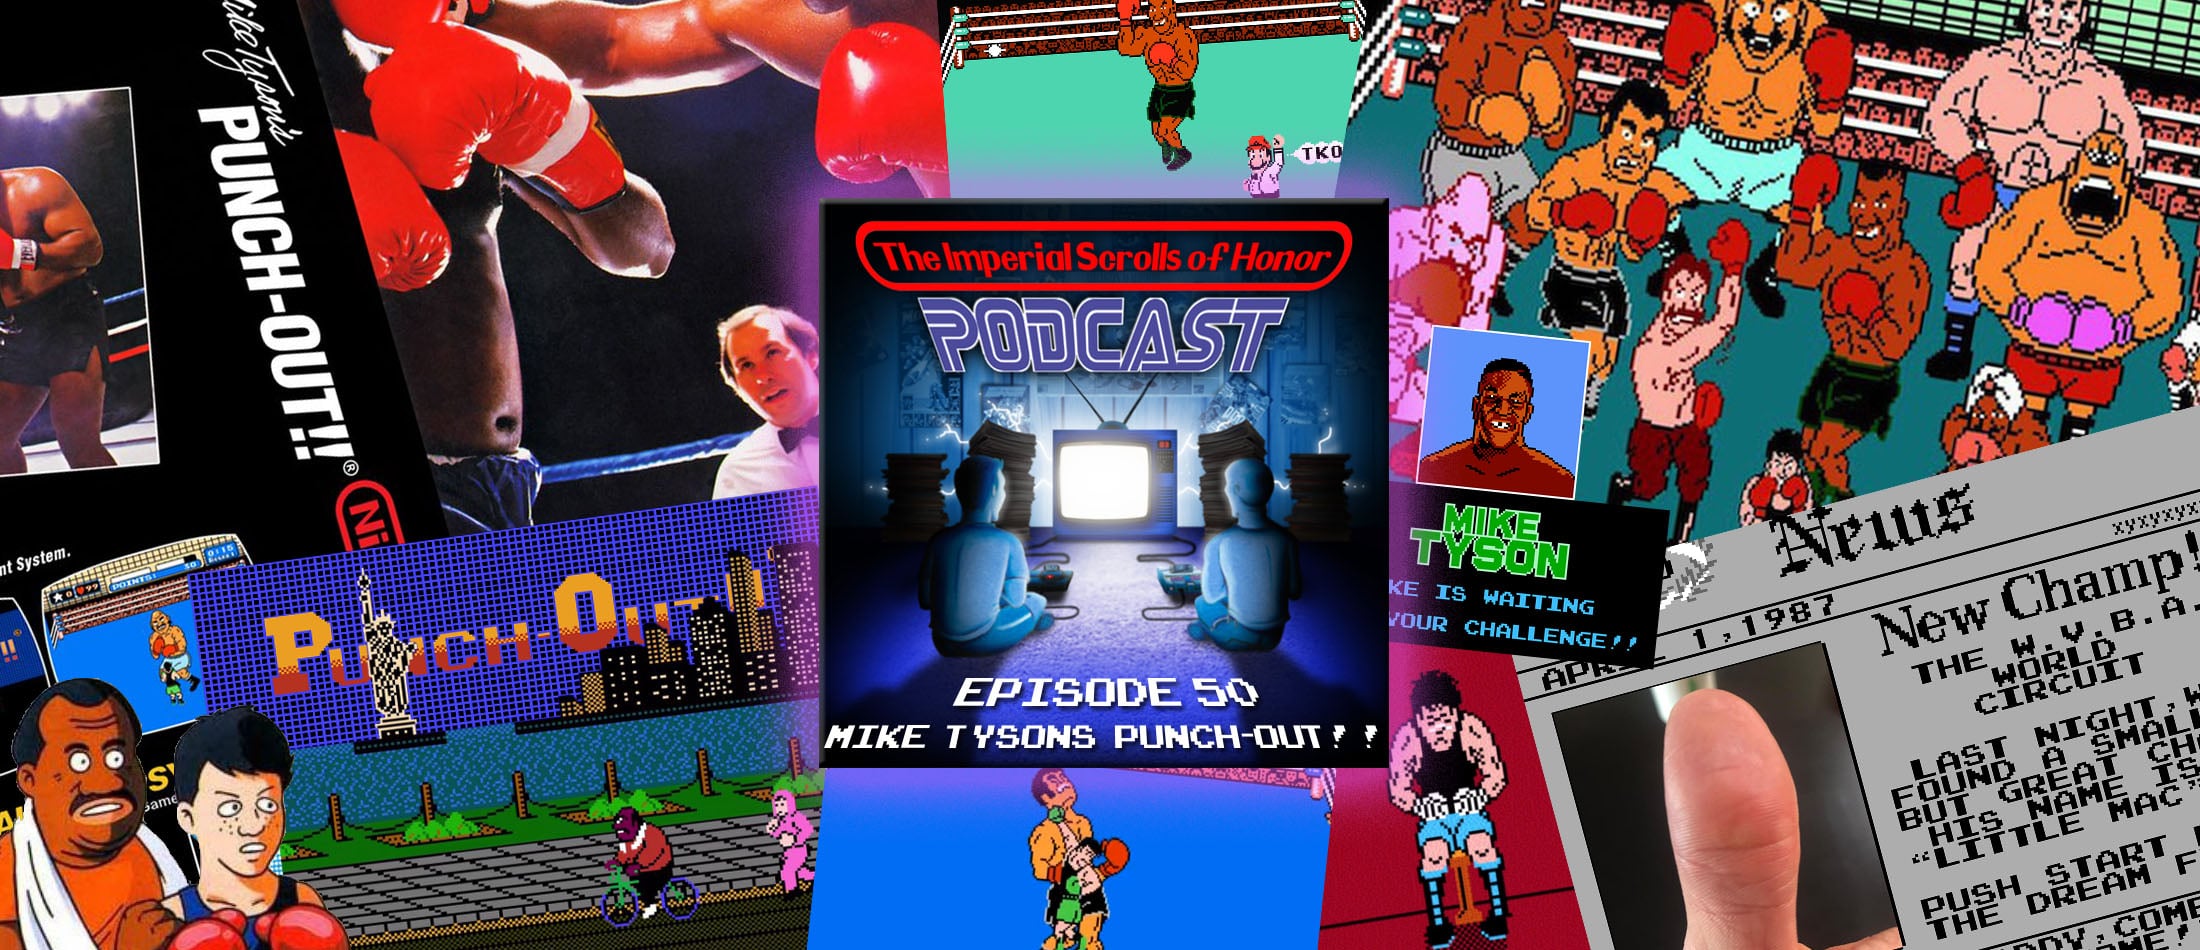 4-3-6-3-3-6-1/Mike Tysons Punch-Out!! (NES)